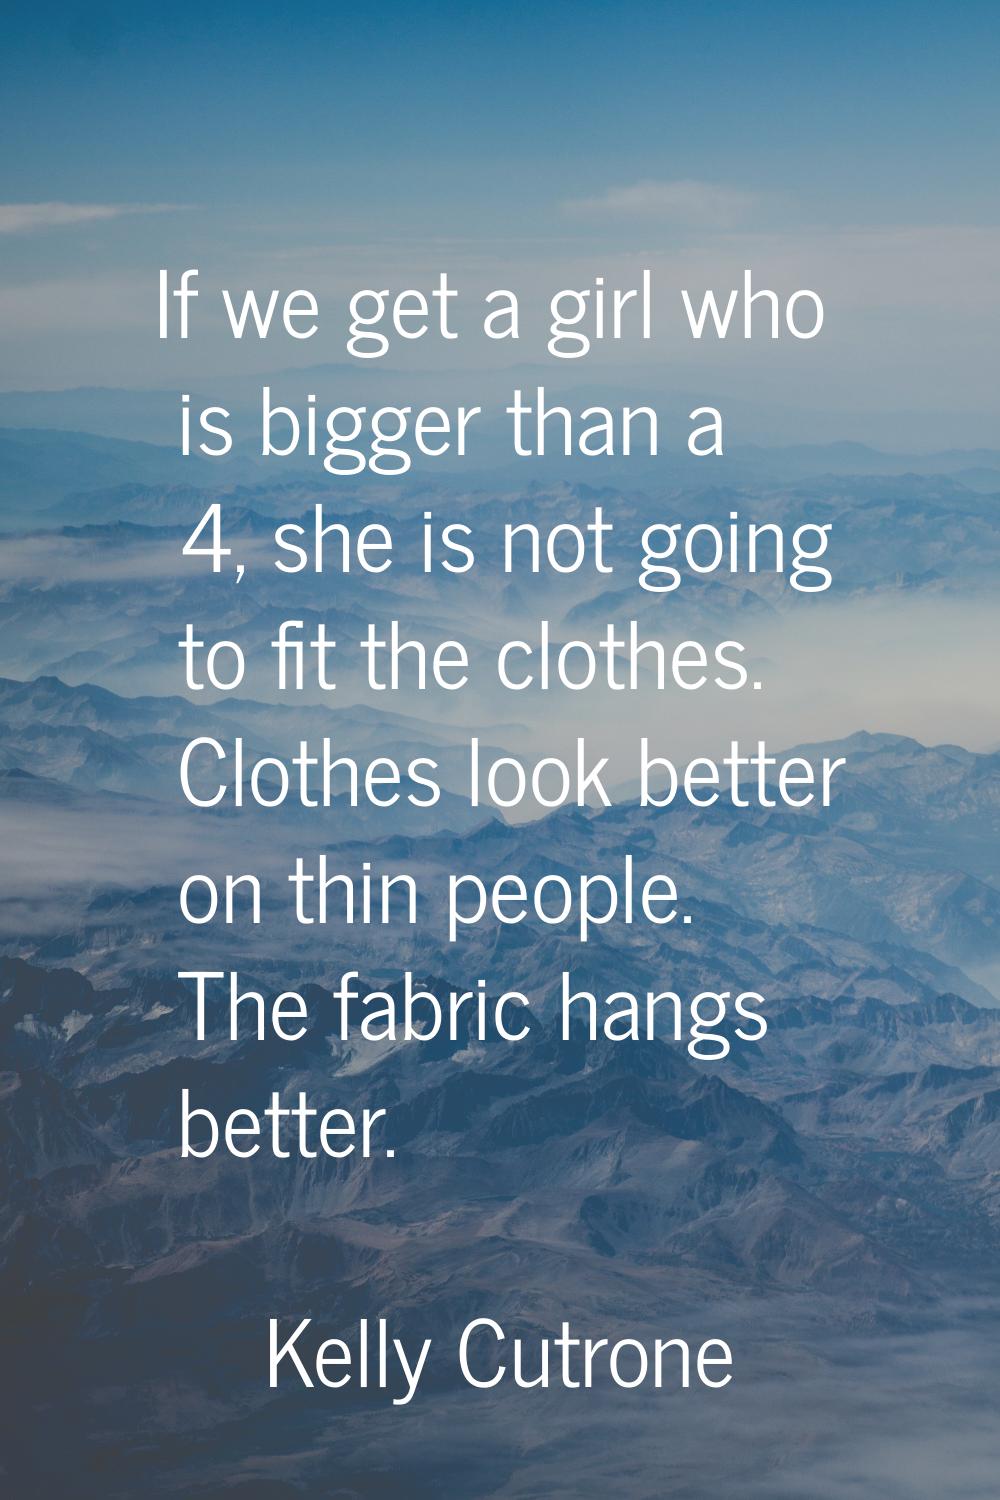 If we get a girl who is bigger than a 4, she is not going to fit the clothes. Clothes look better o